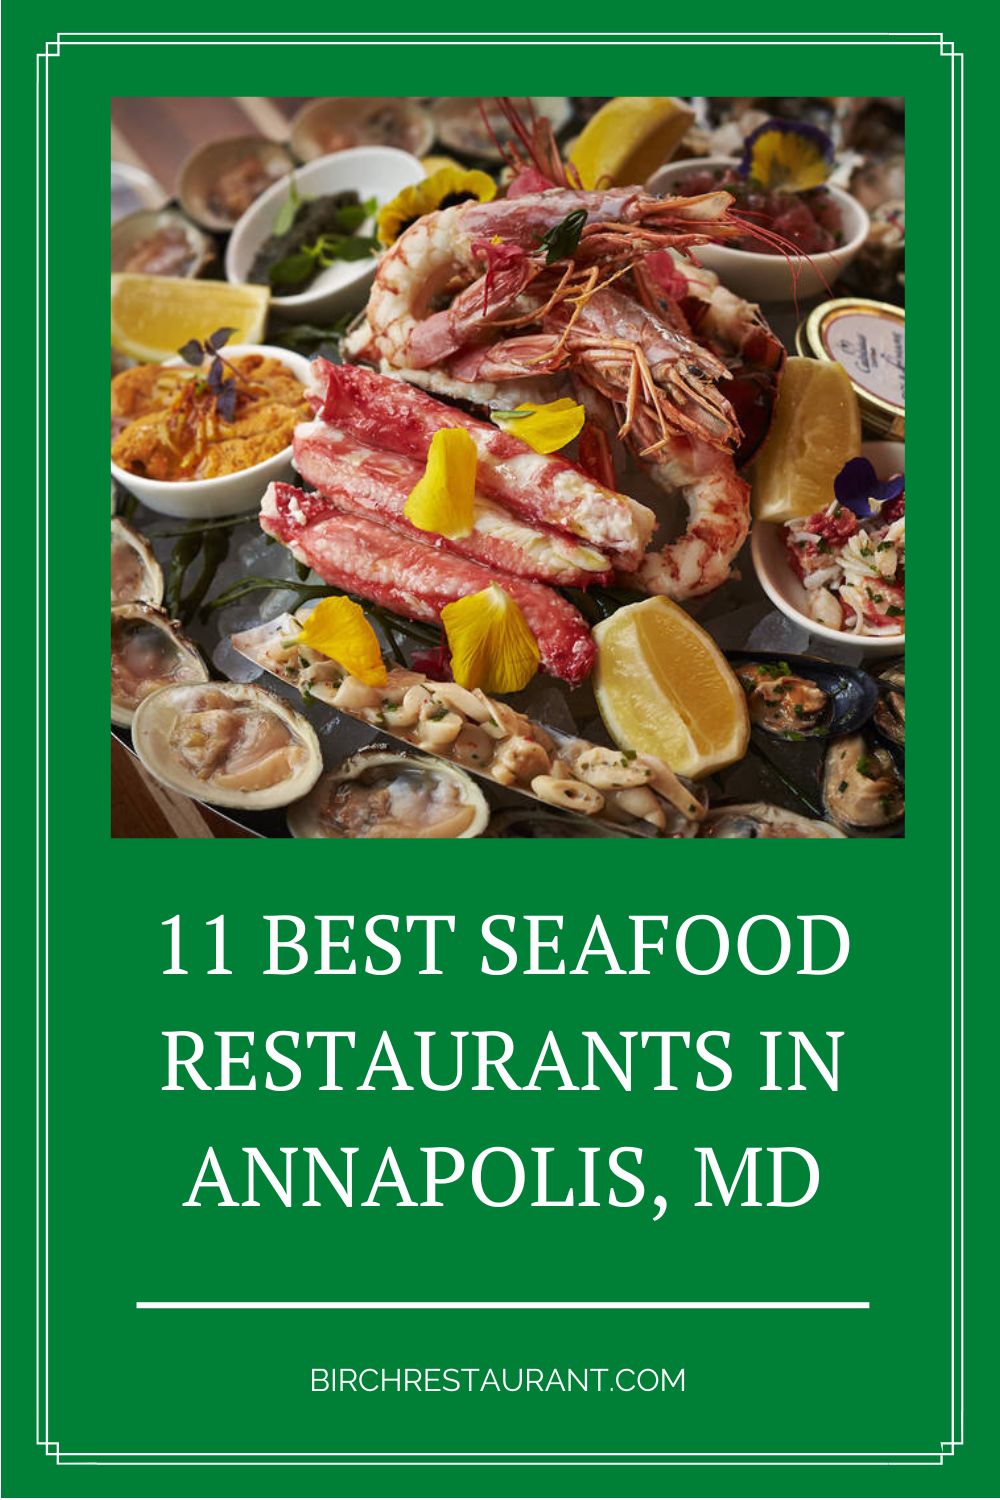 Seafood Restaurants in Annapolis